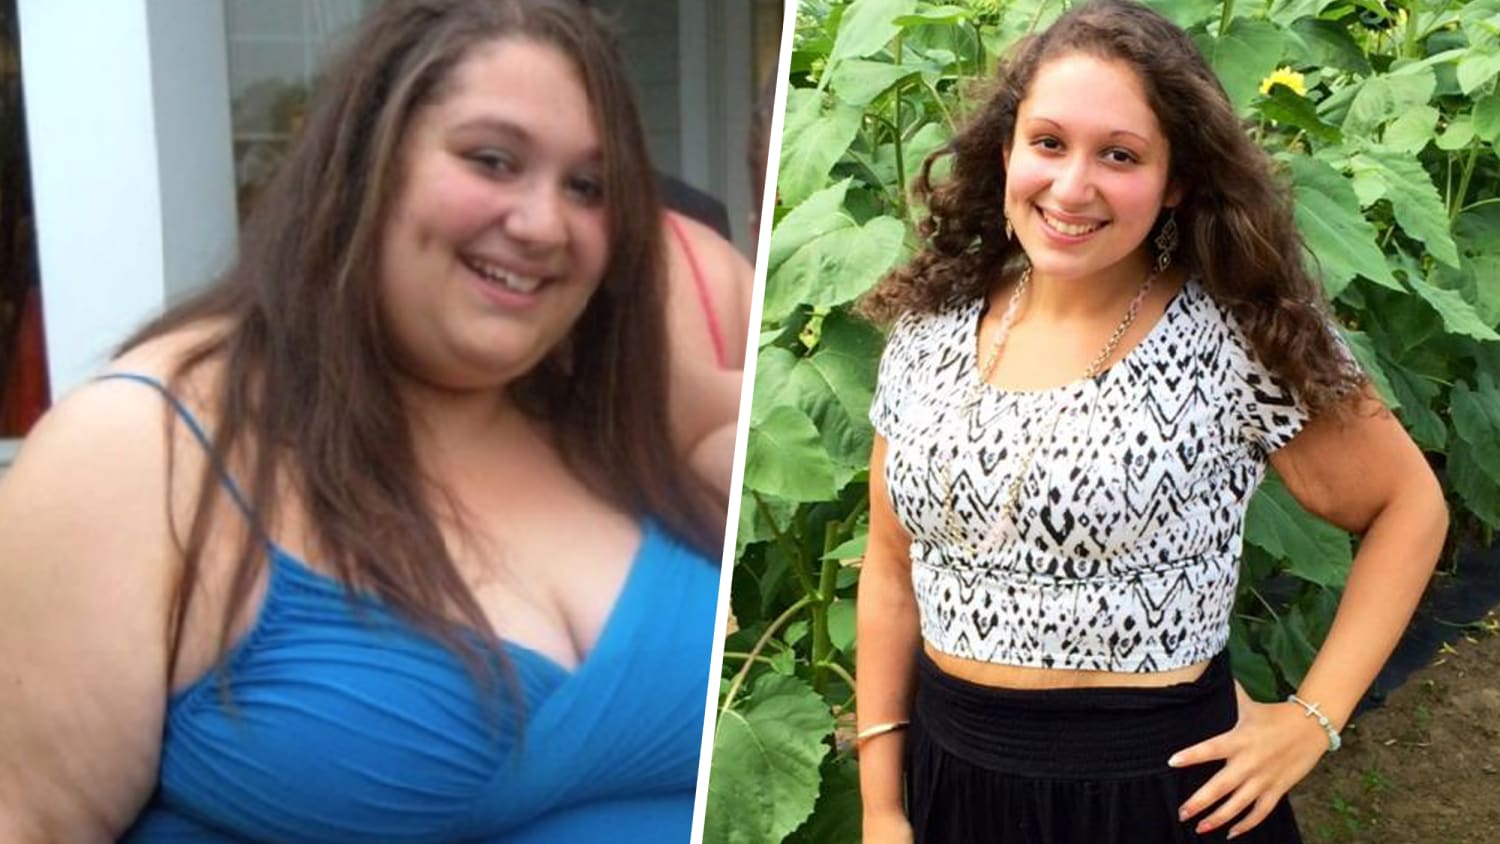 Weight-loss success: How this woman lost 150 pounds in 2 years.